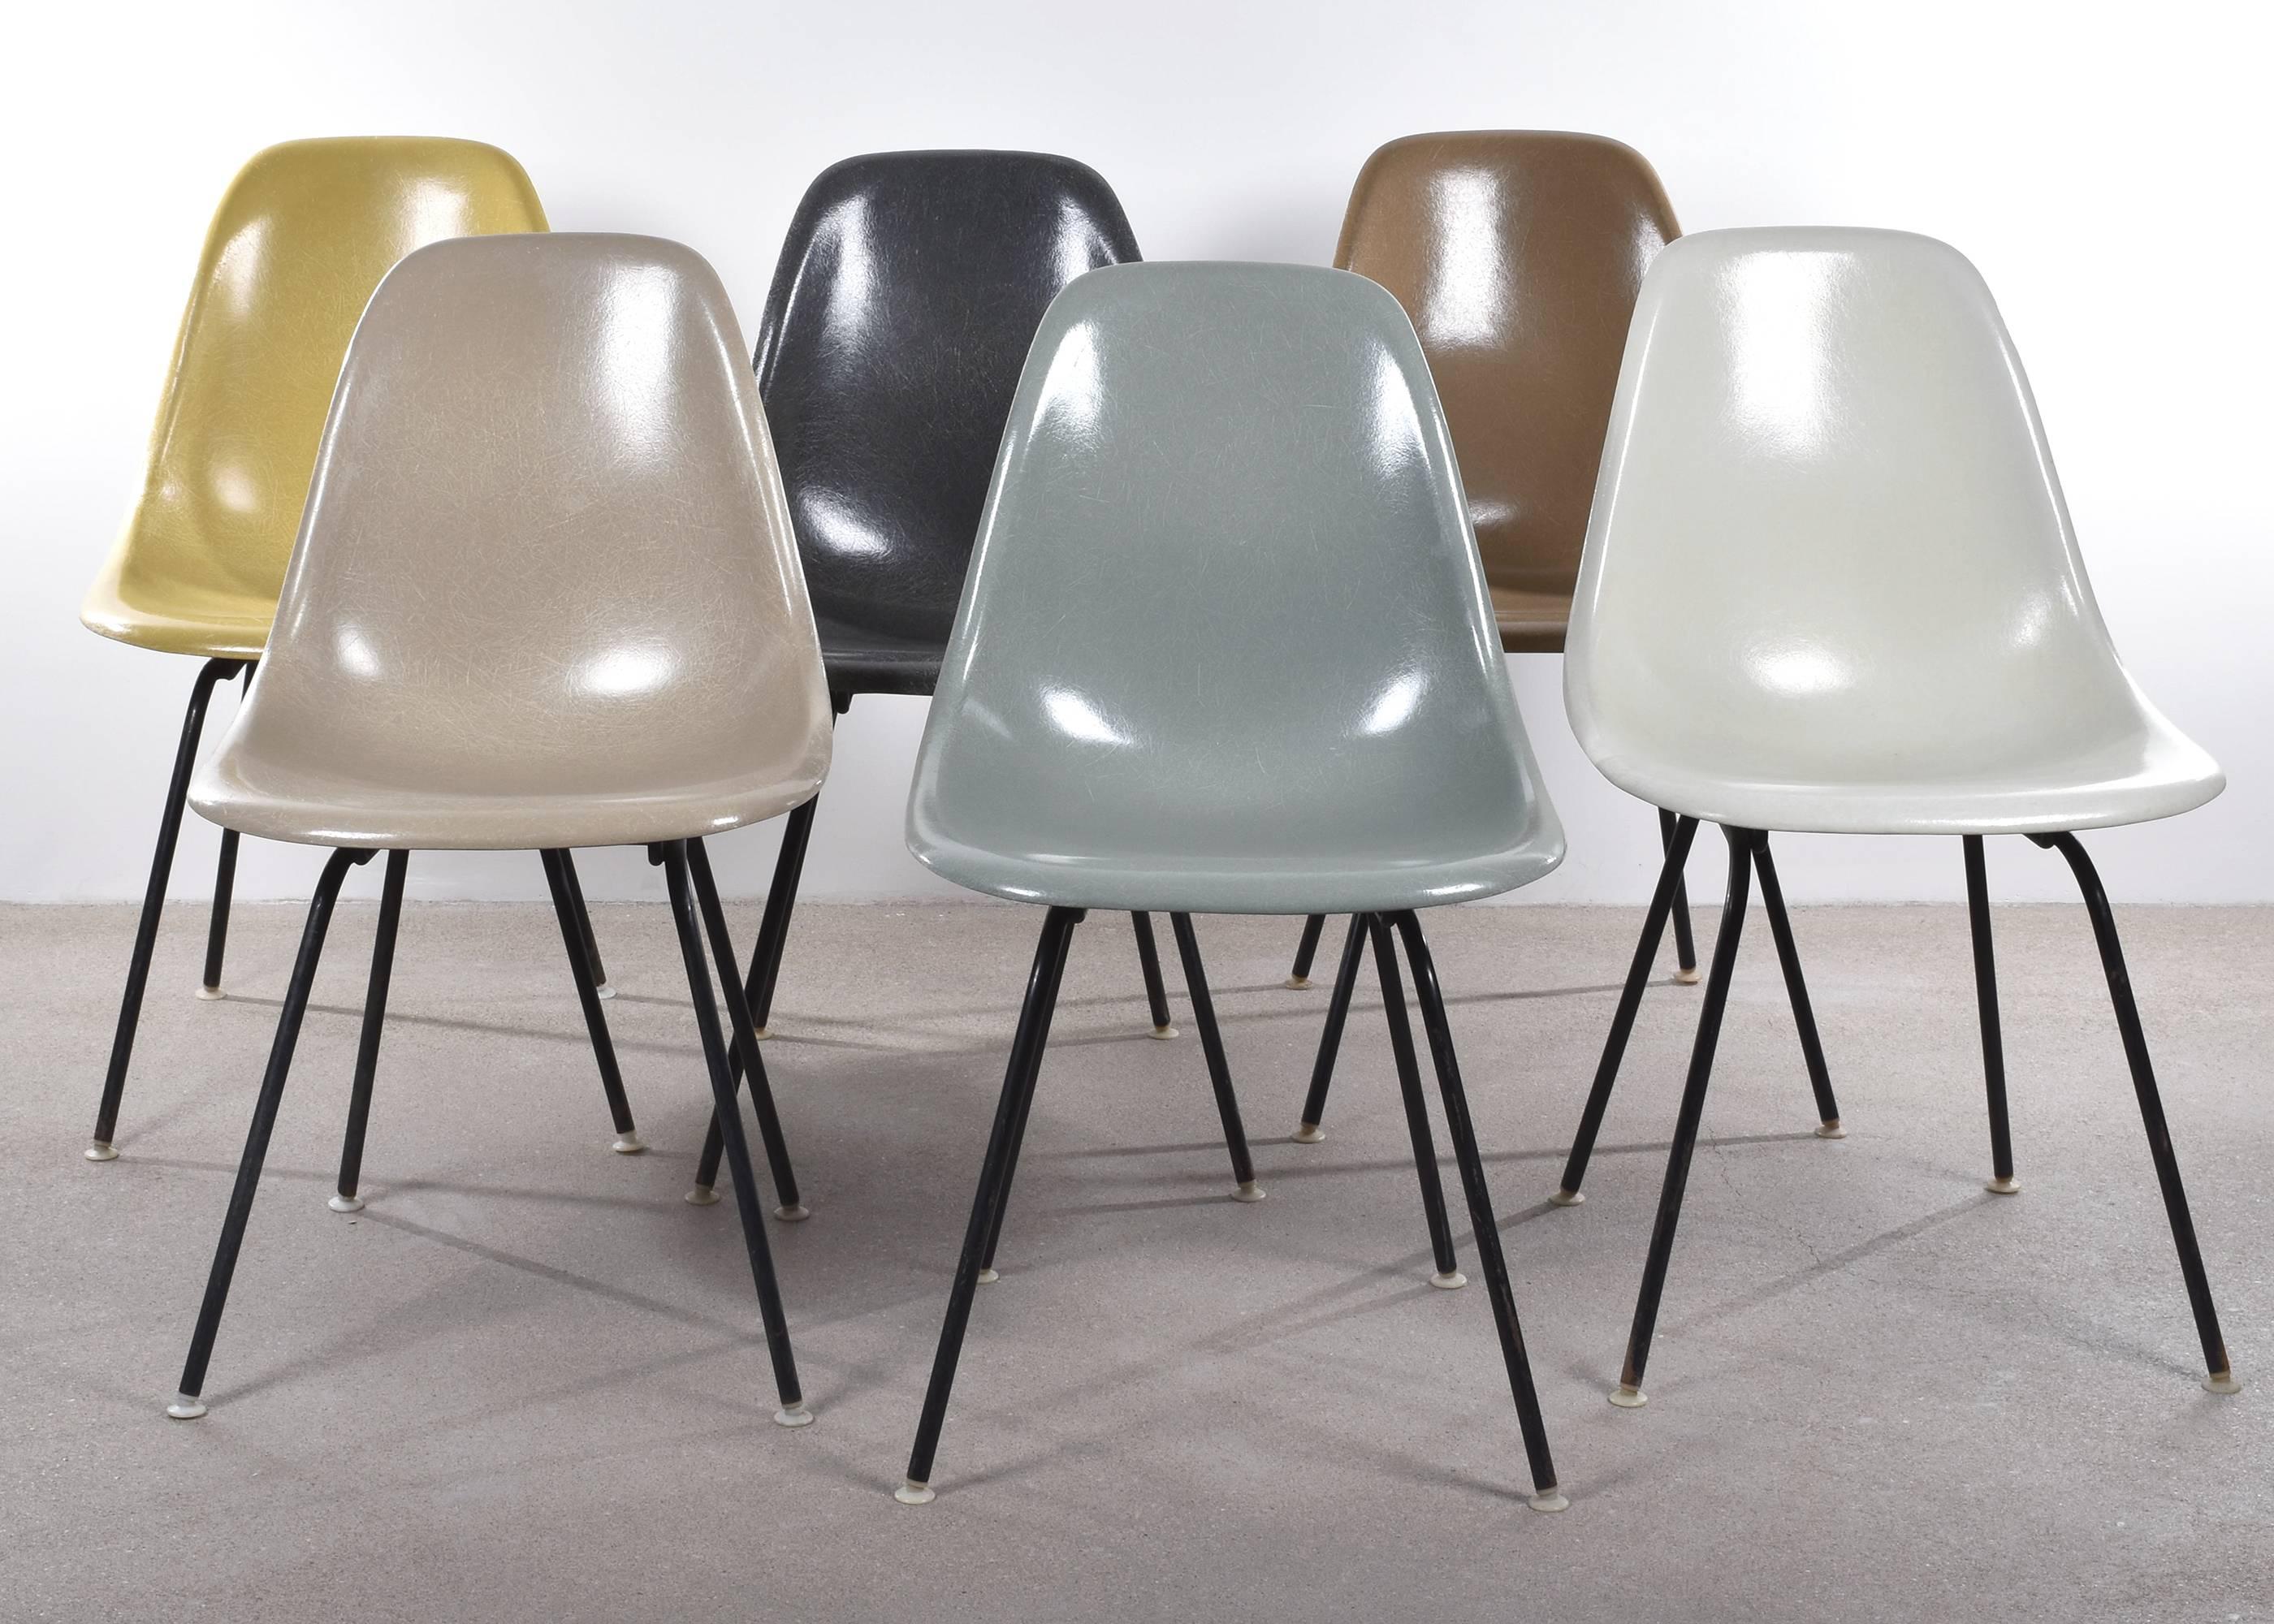 Beautiful iconic DSX chairs in natural colors: Parchment, greige, ochre light, elephant hide grey, sea foam green, tan light. Shells are in very good or excellent condition with only slight traces of use. Replaced shock mounts which guarantee save